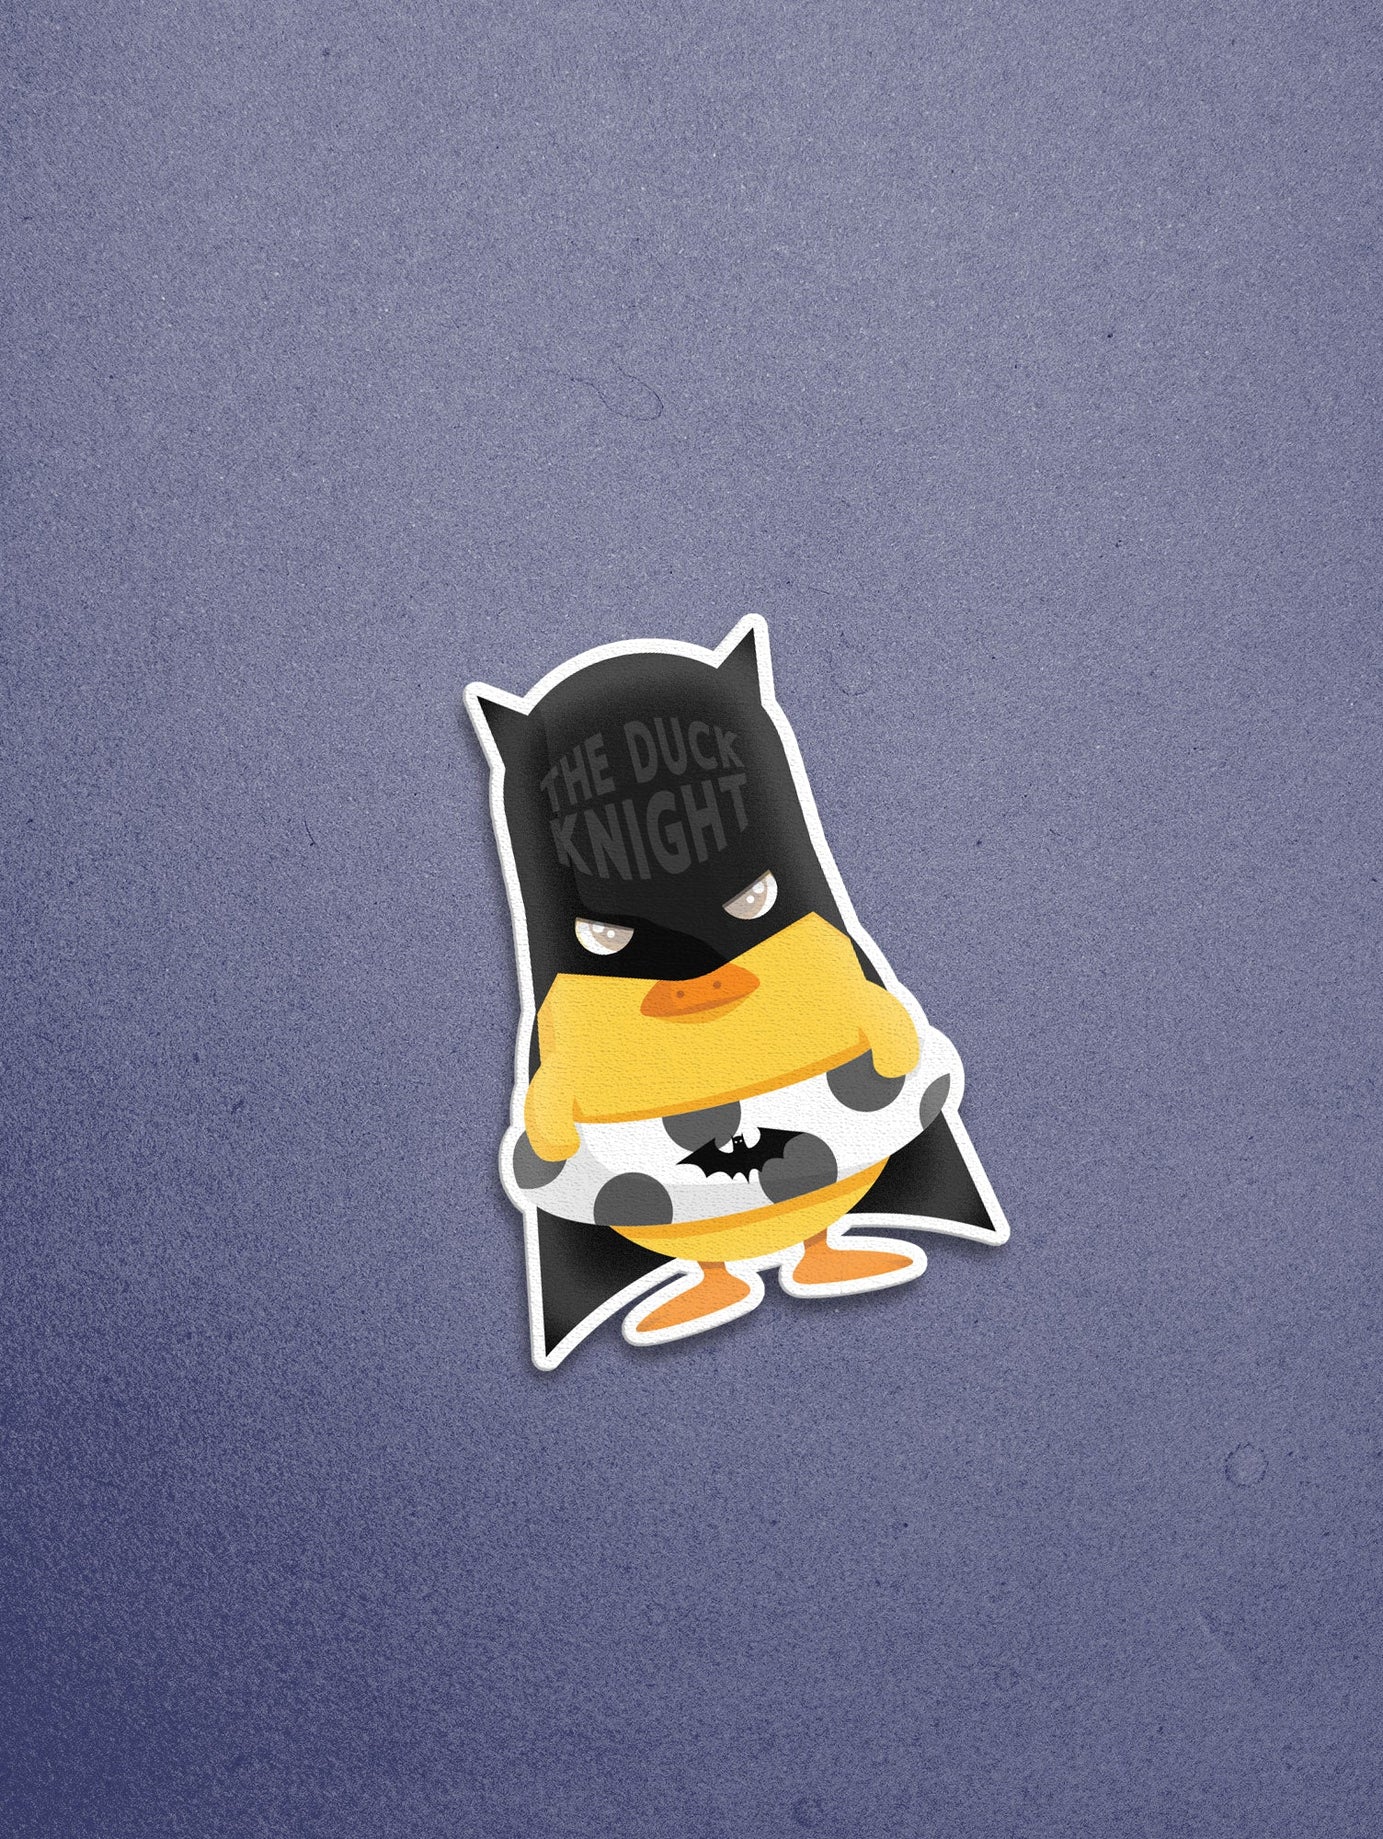 The Duck Knight Sticker - Lazybut